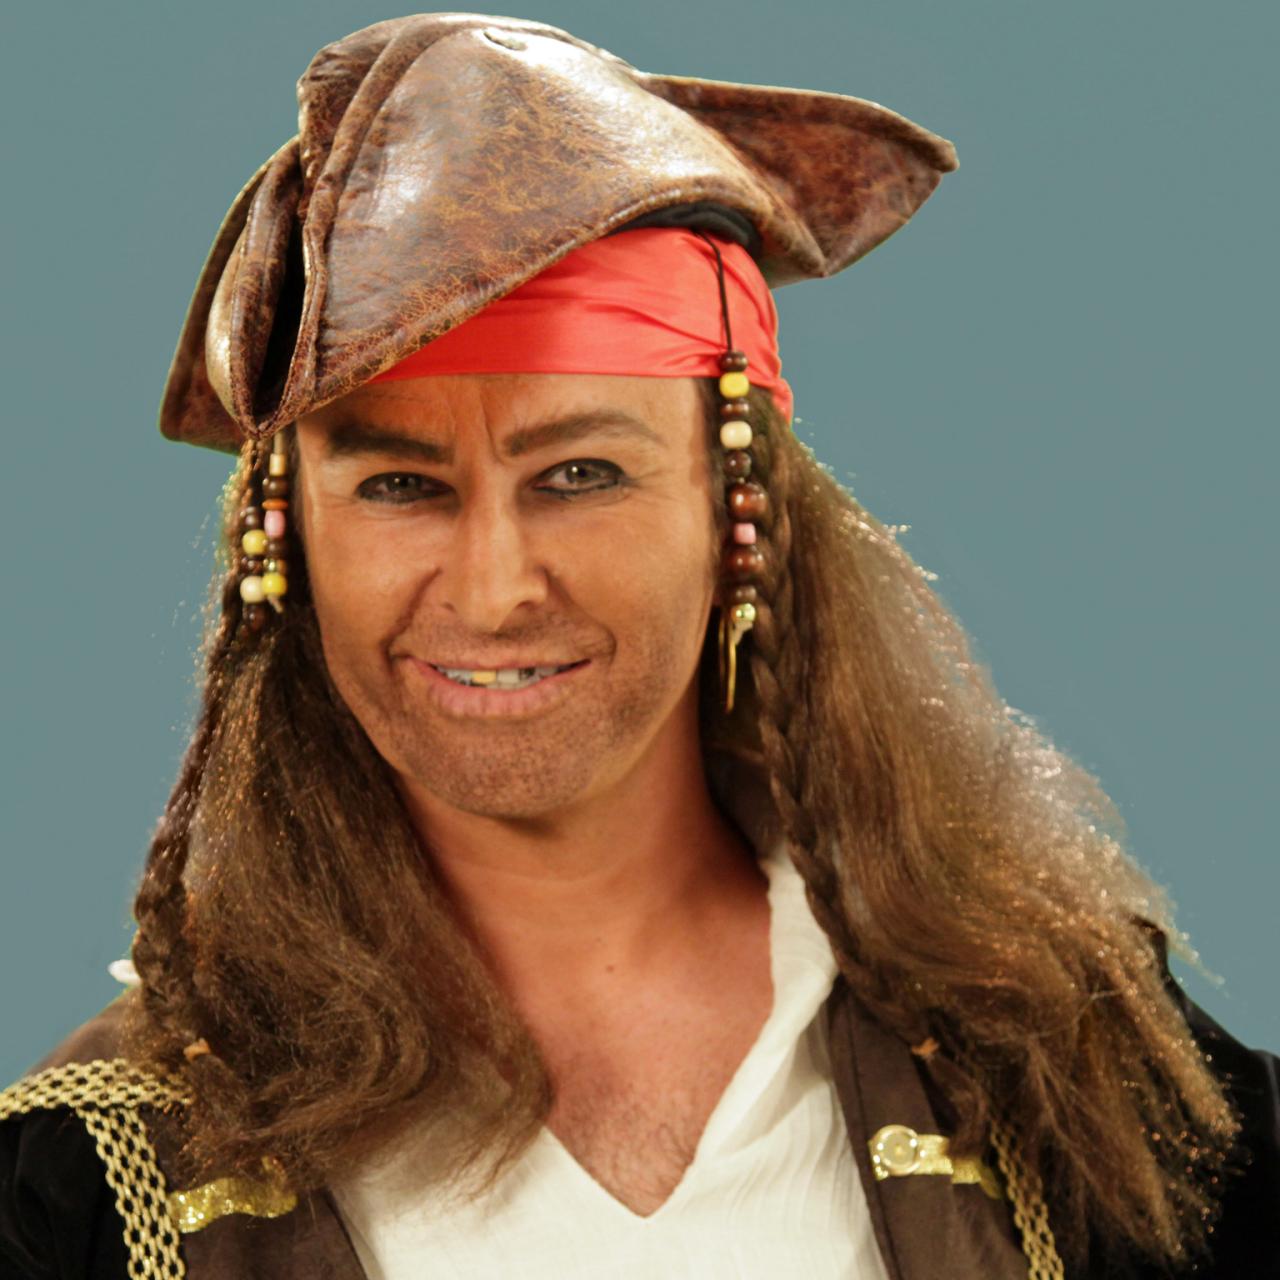 DIY Pirate Costume. Just bought a plain captain hook costume and